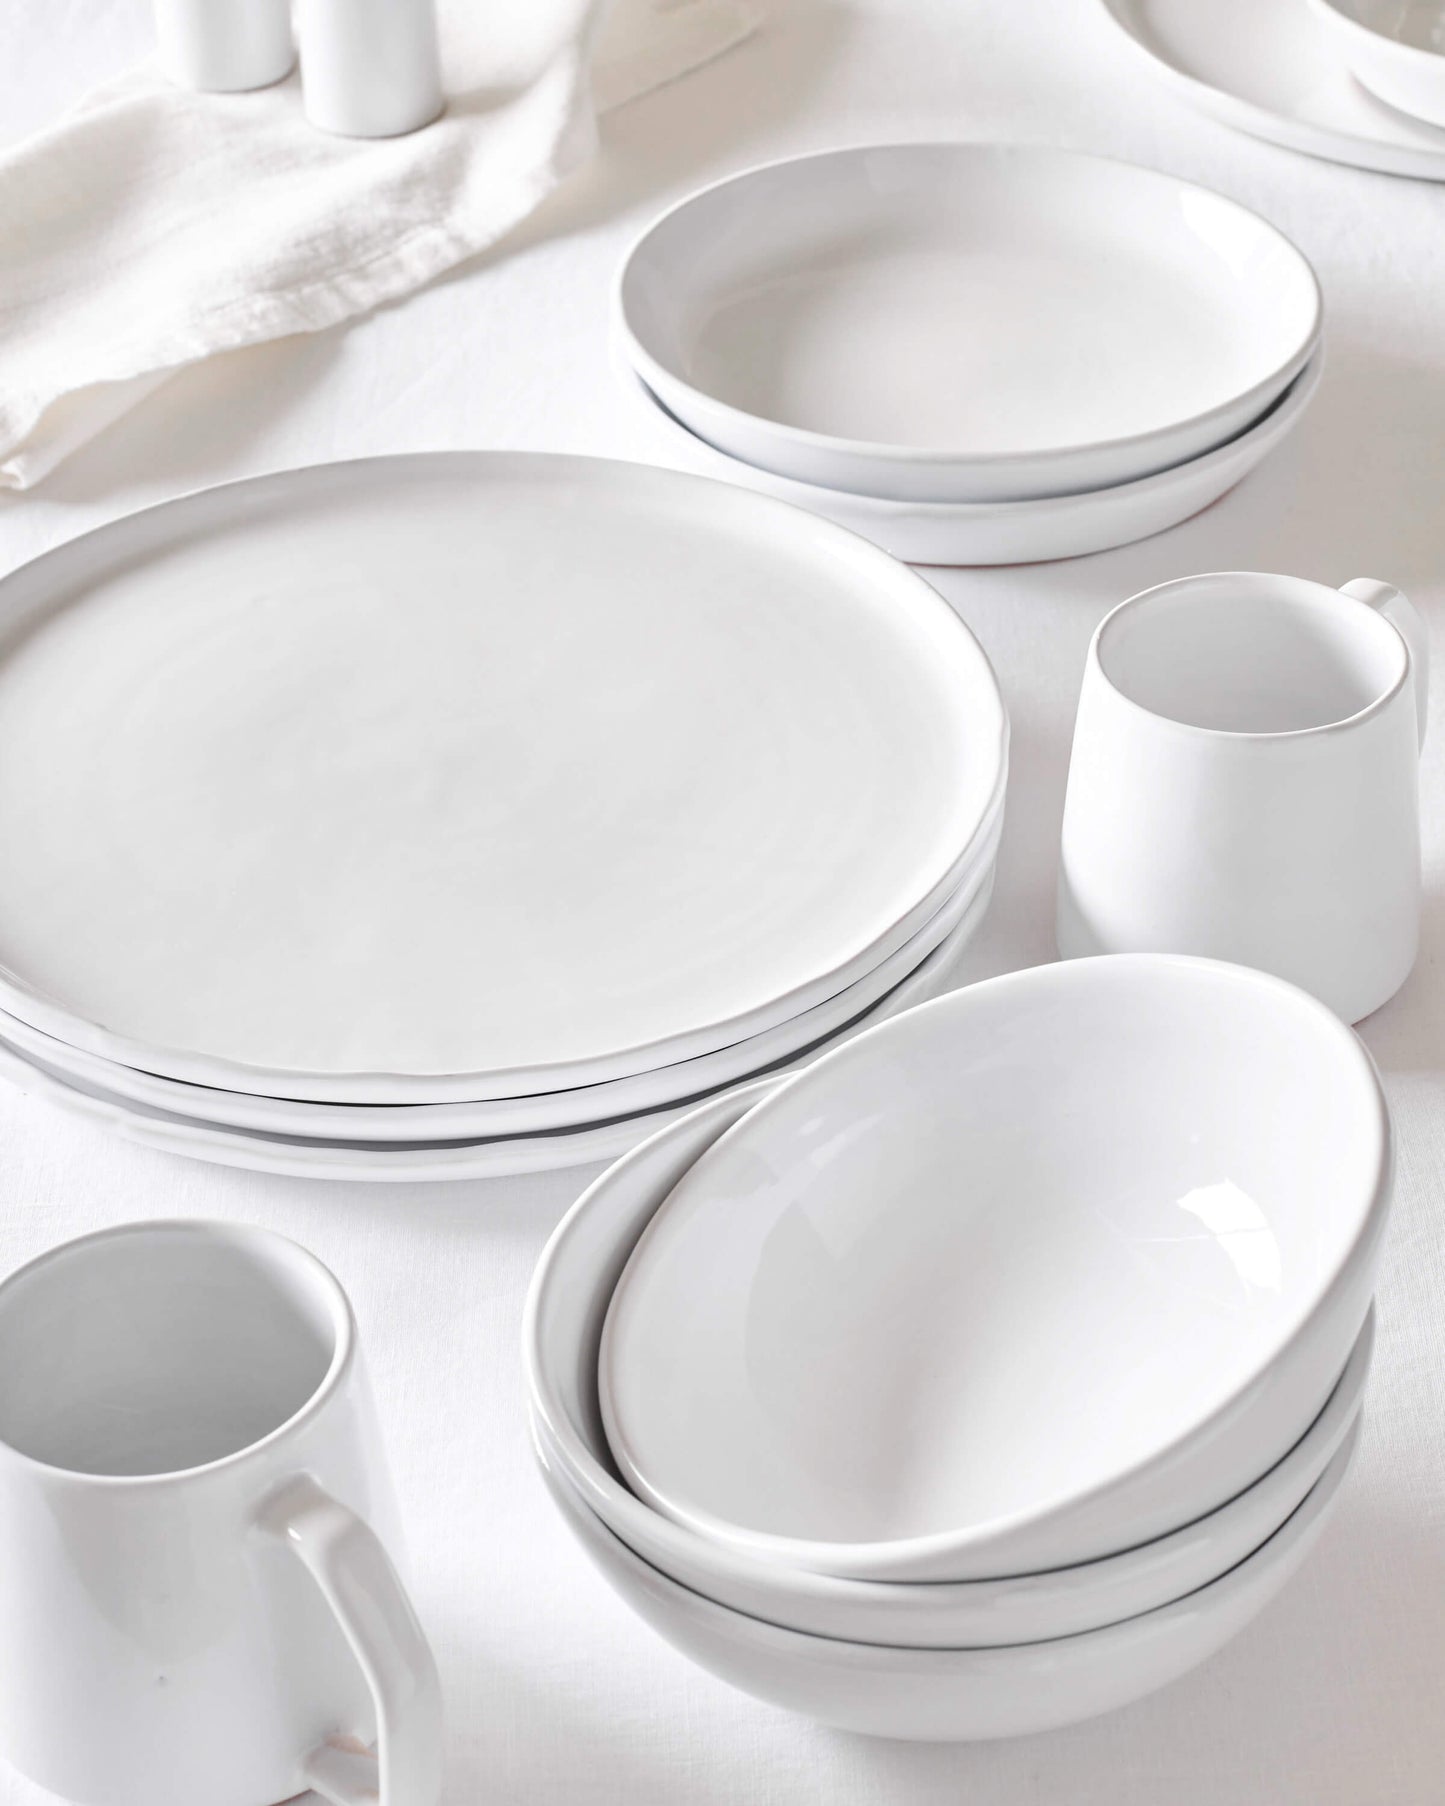 Khira Dinnerware from Fairkind's Morocco Ceramic Collection. 